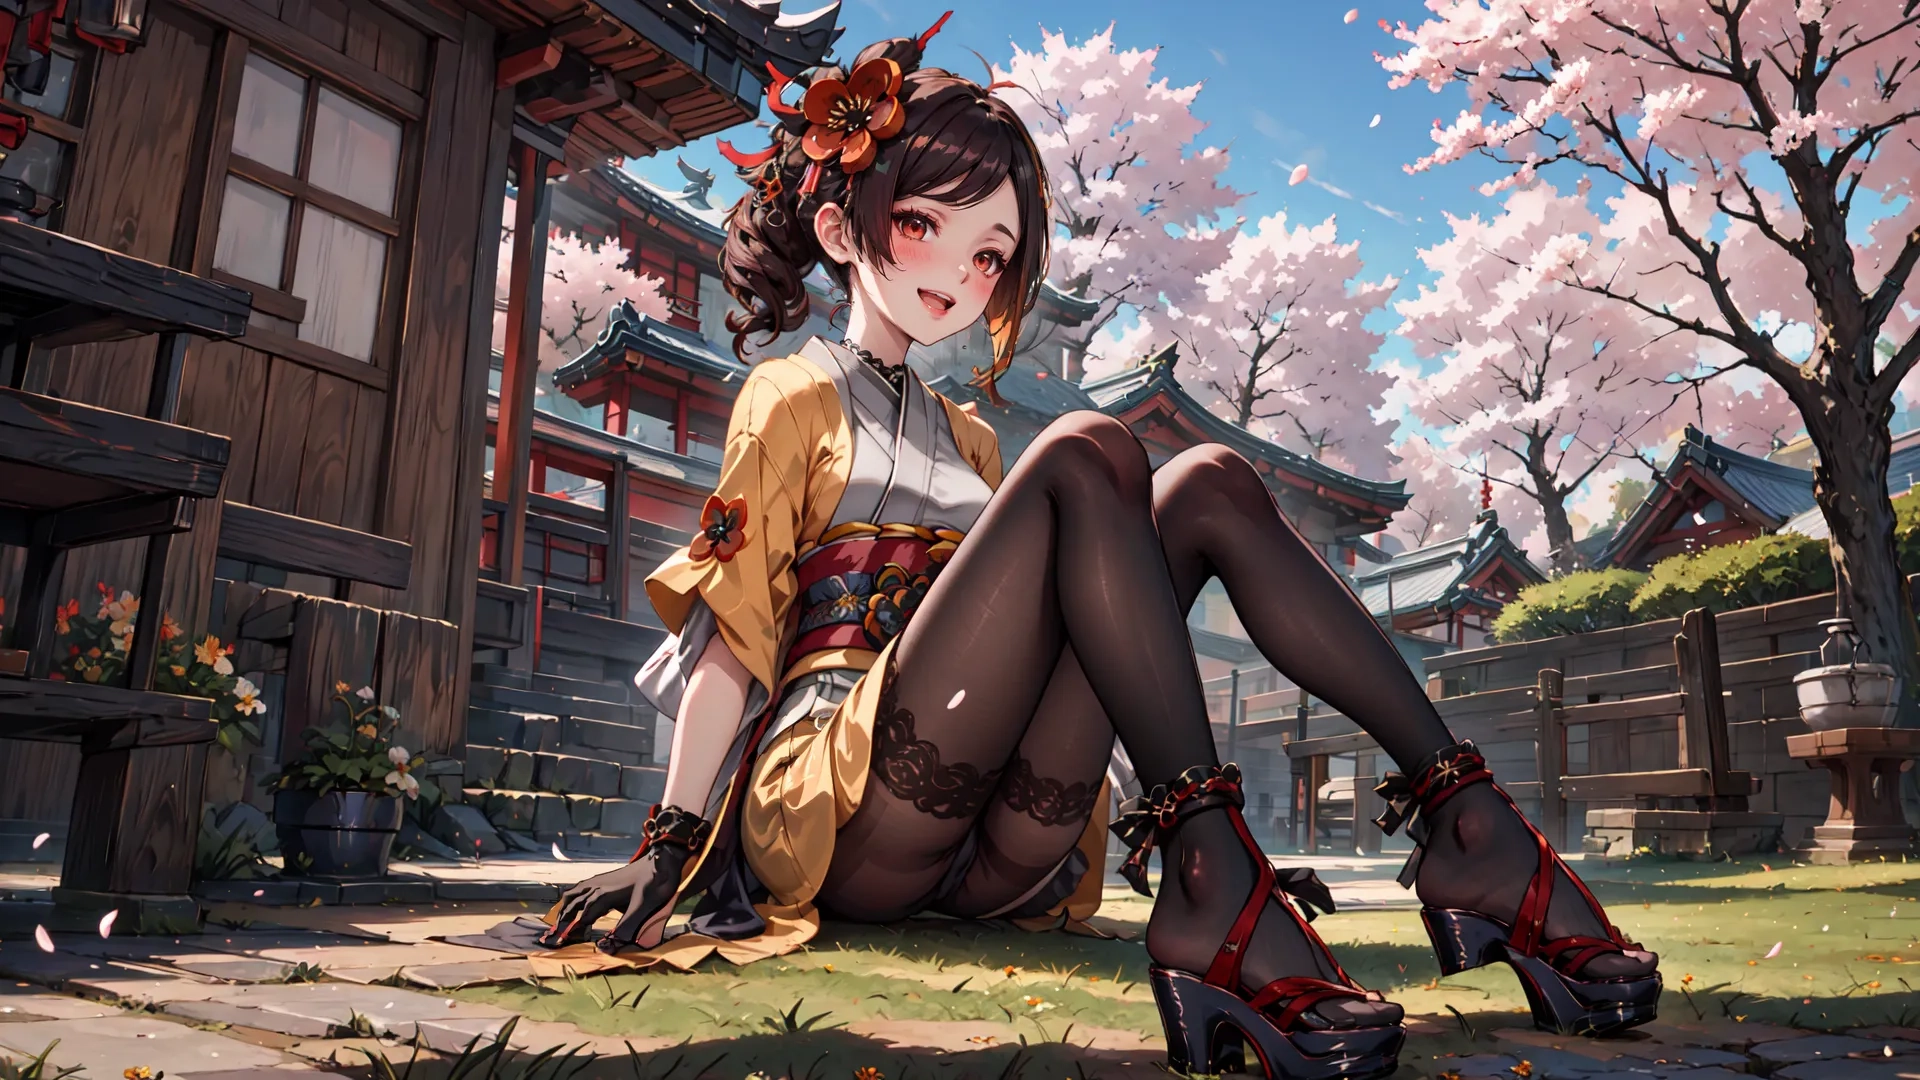 a woman has a very pretty high heely thing in the grass near a building and pink flowers with a cherry blossom in the background
